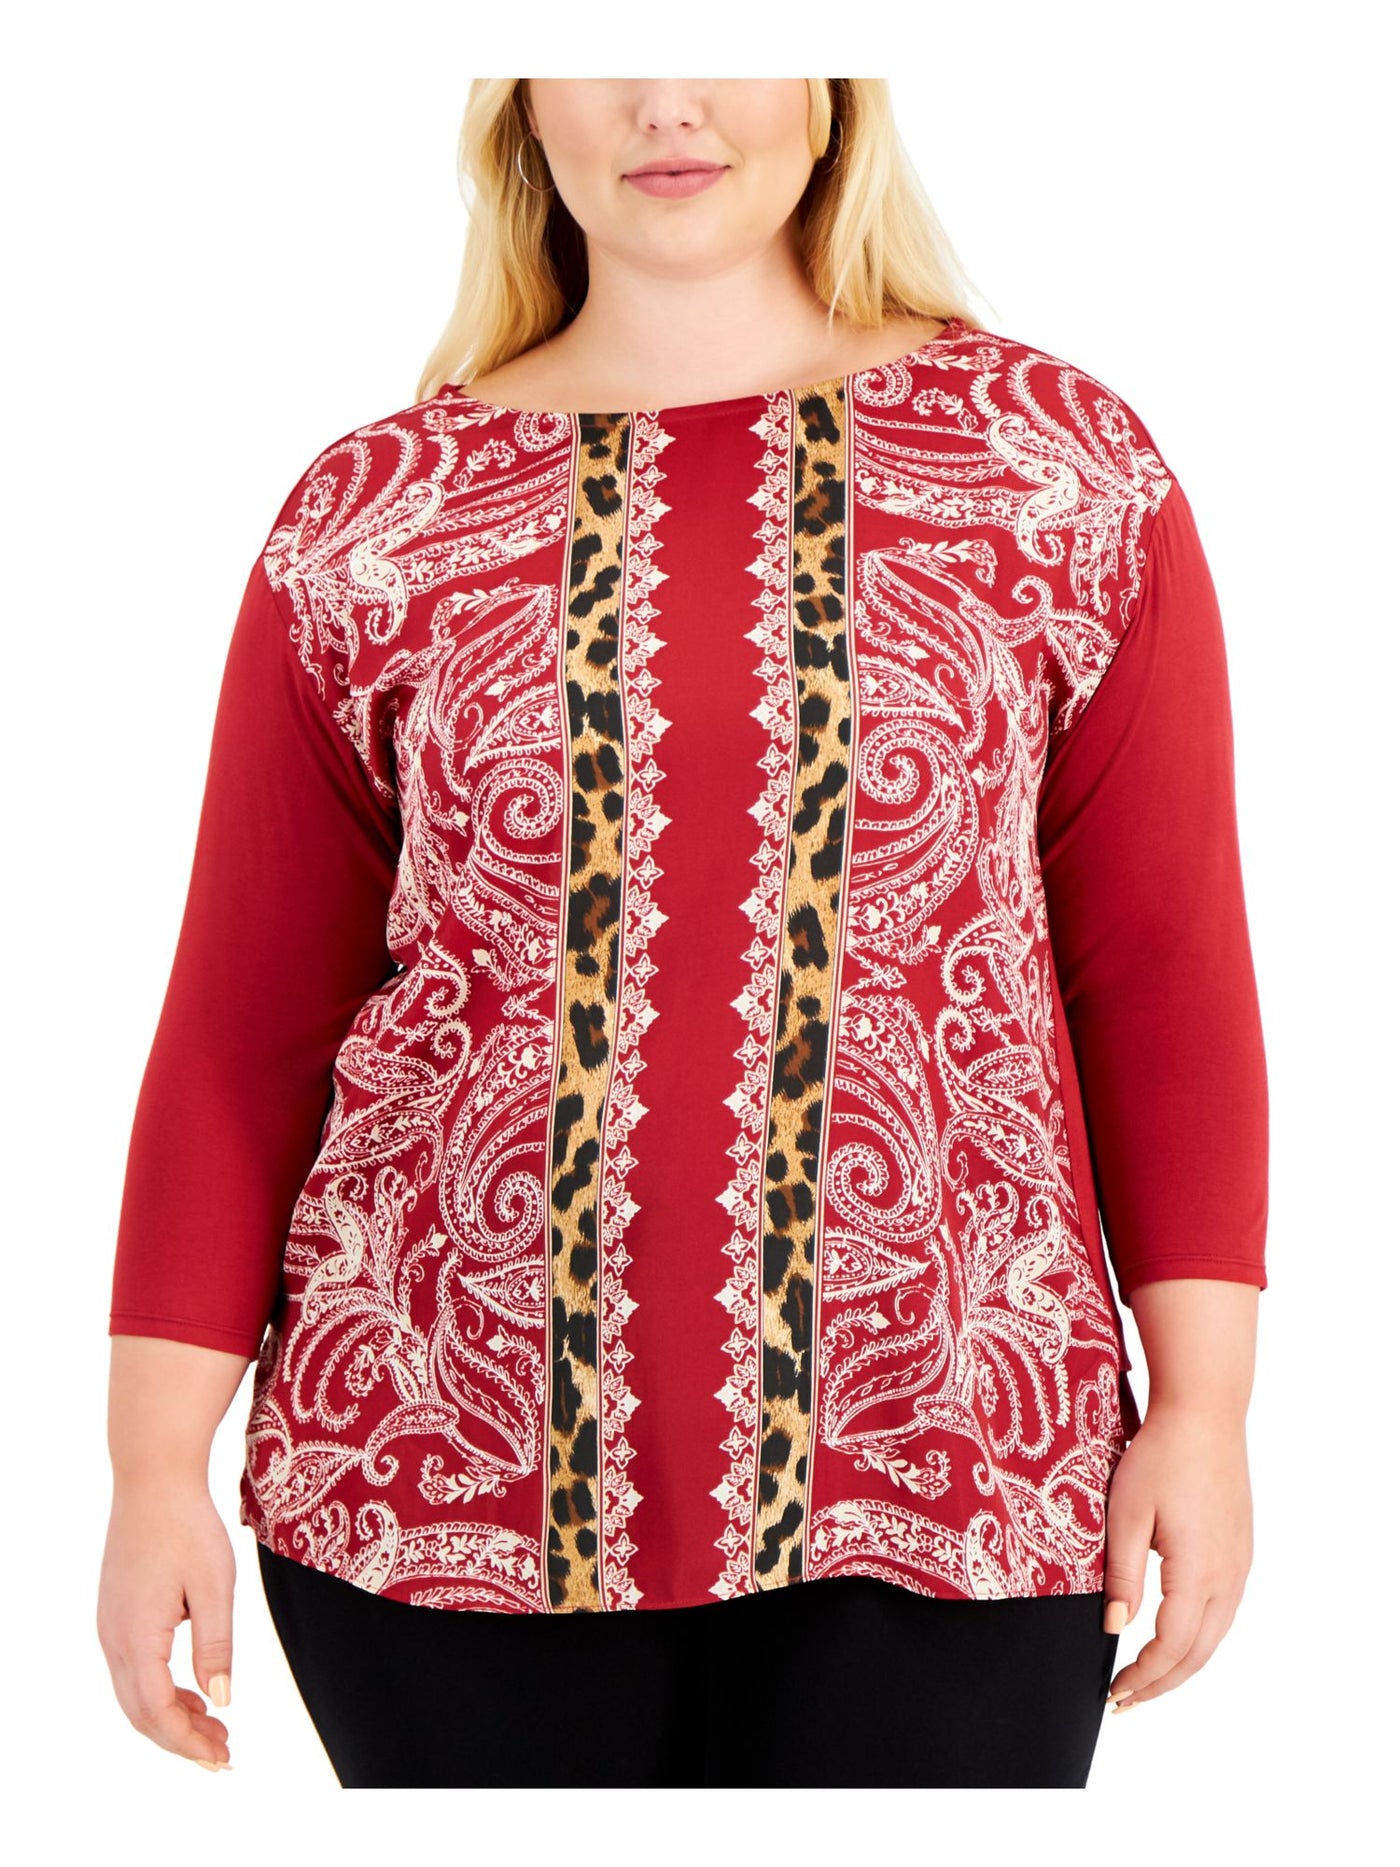 JM COLLECTION Womens Red Printed 3/4 Sleeve Boat Neck Top Plus 2X